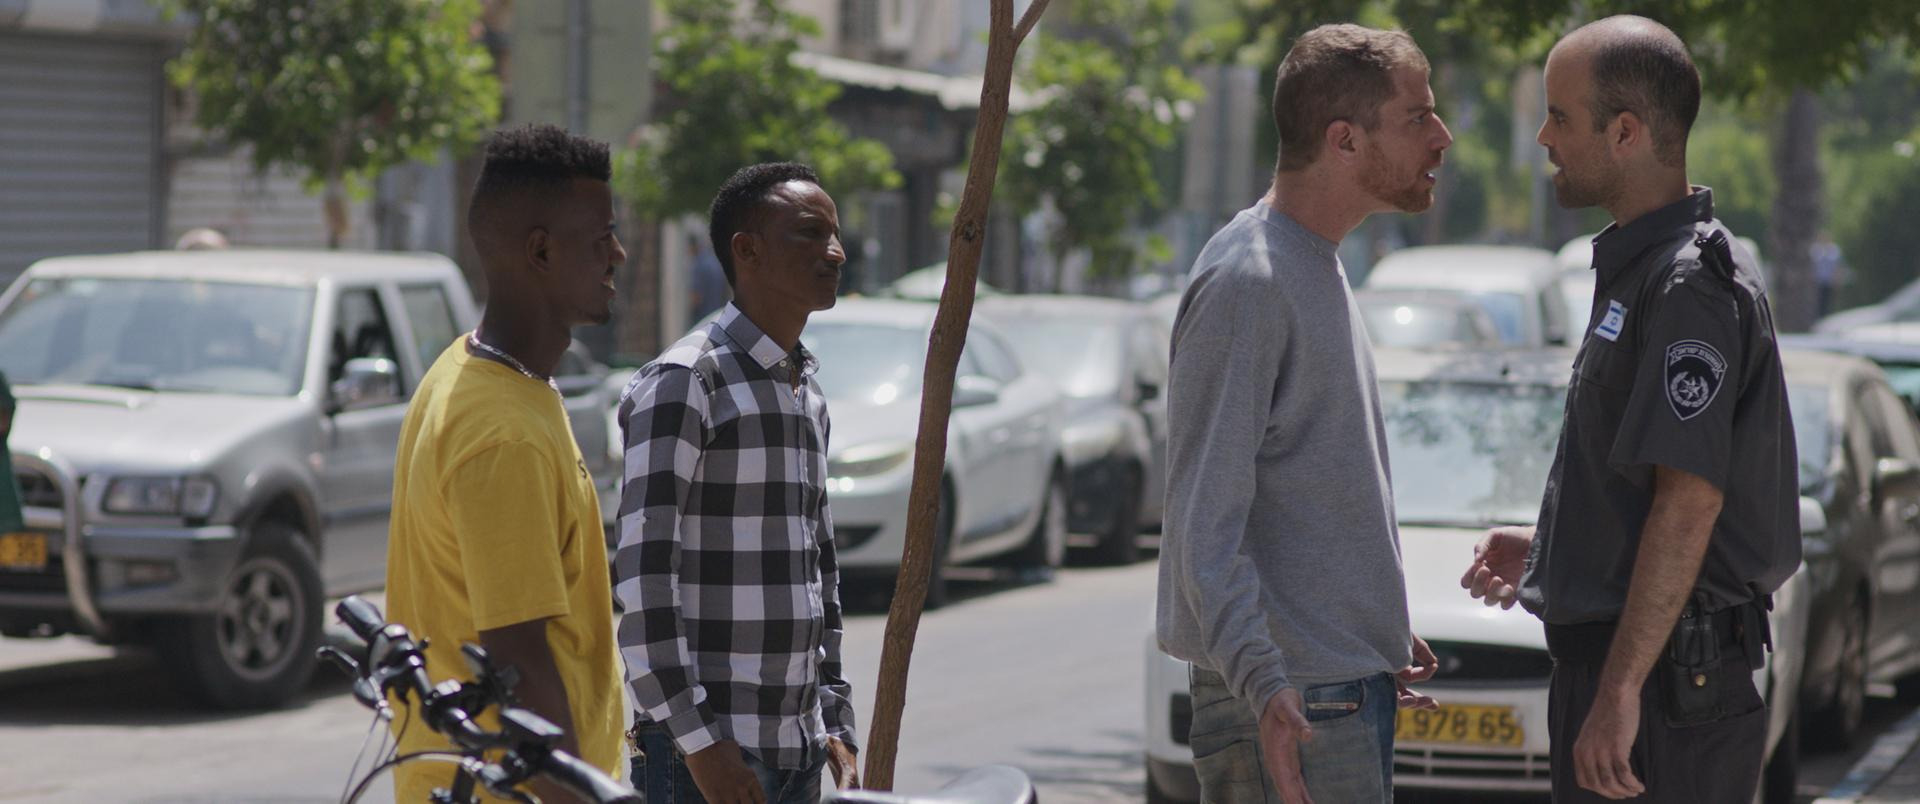 A still from Concerned Citizen. A white man is yelling at a cop while two black men stand behind him confused.